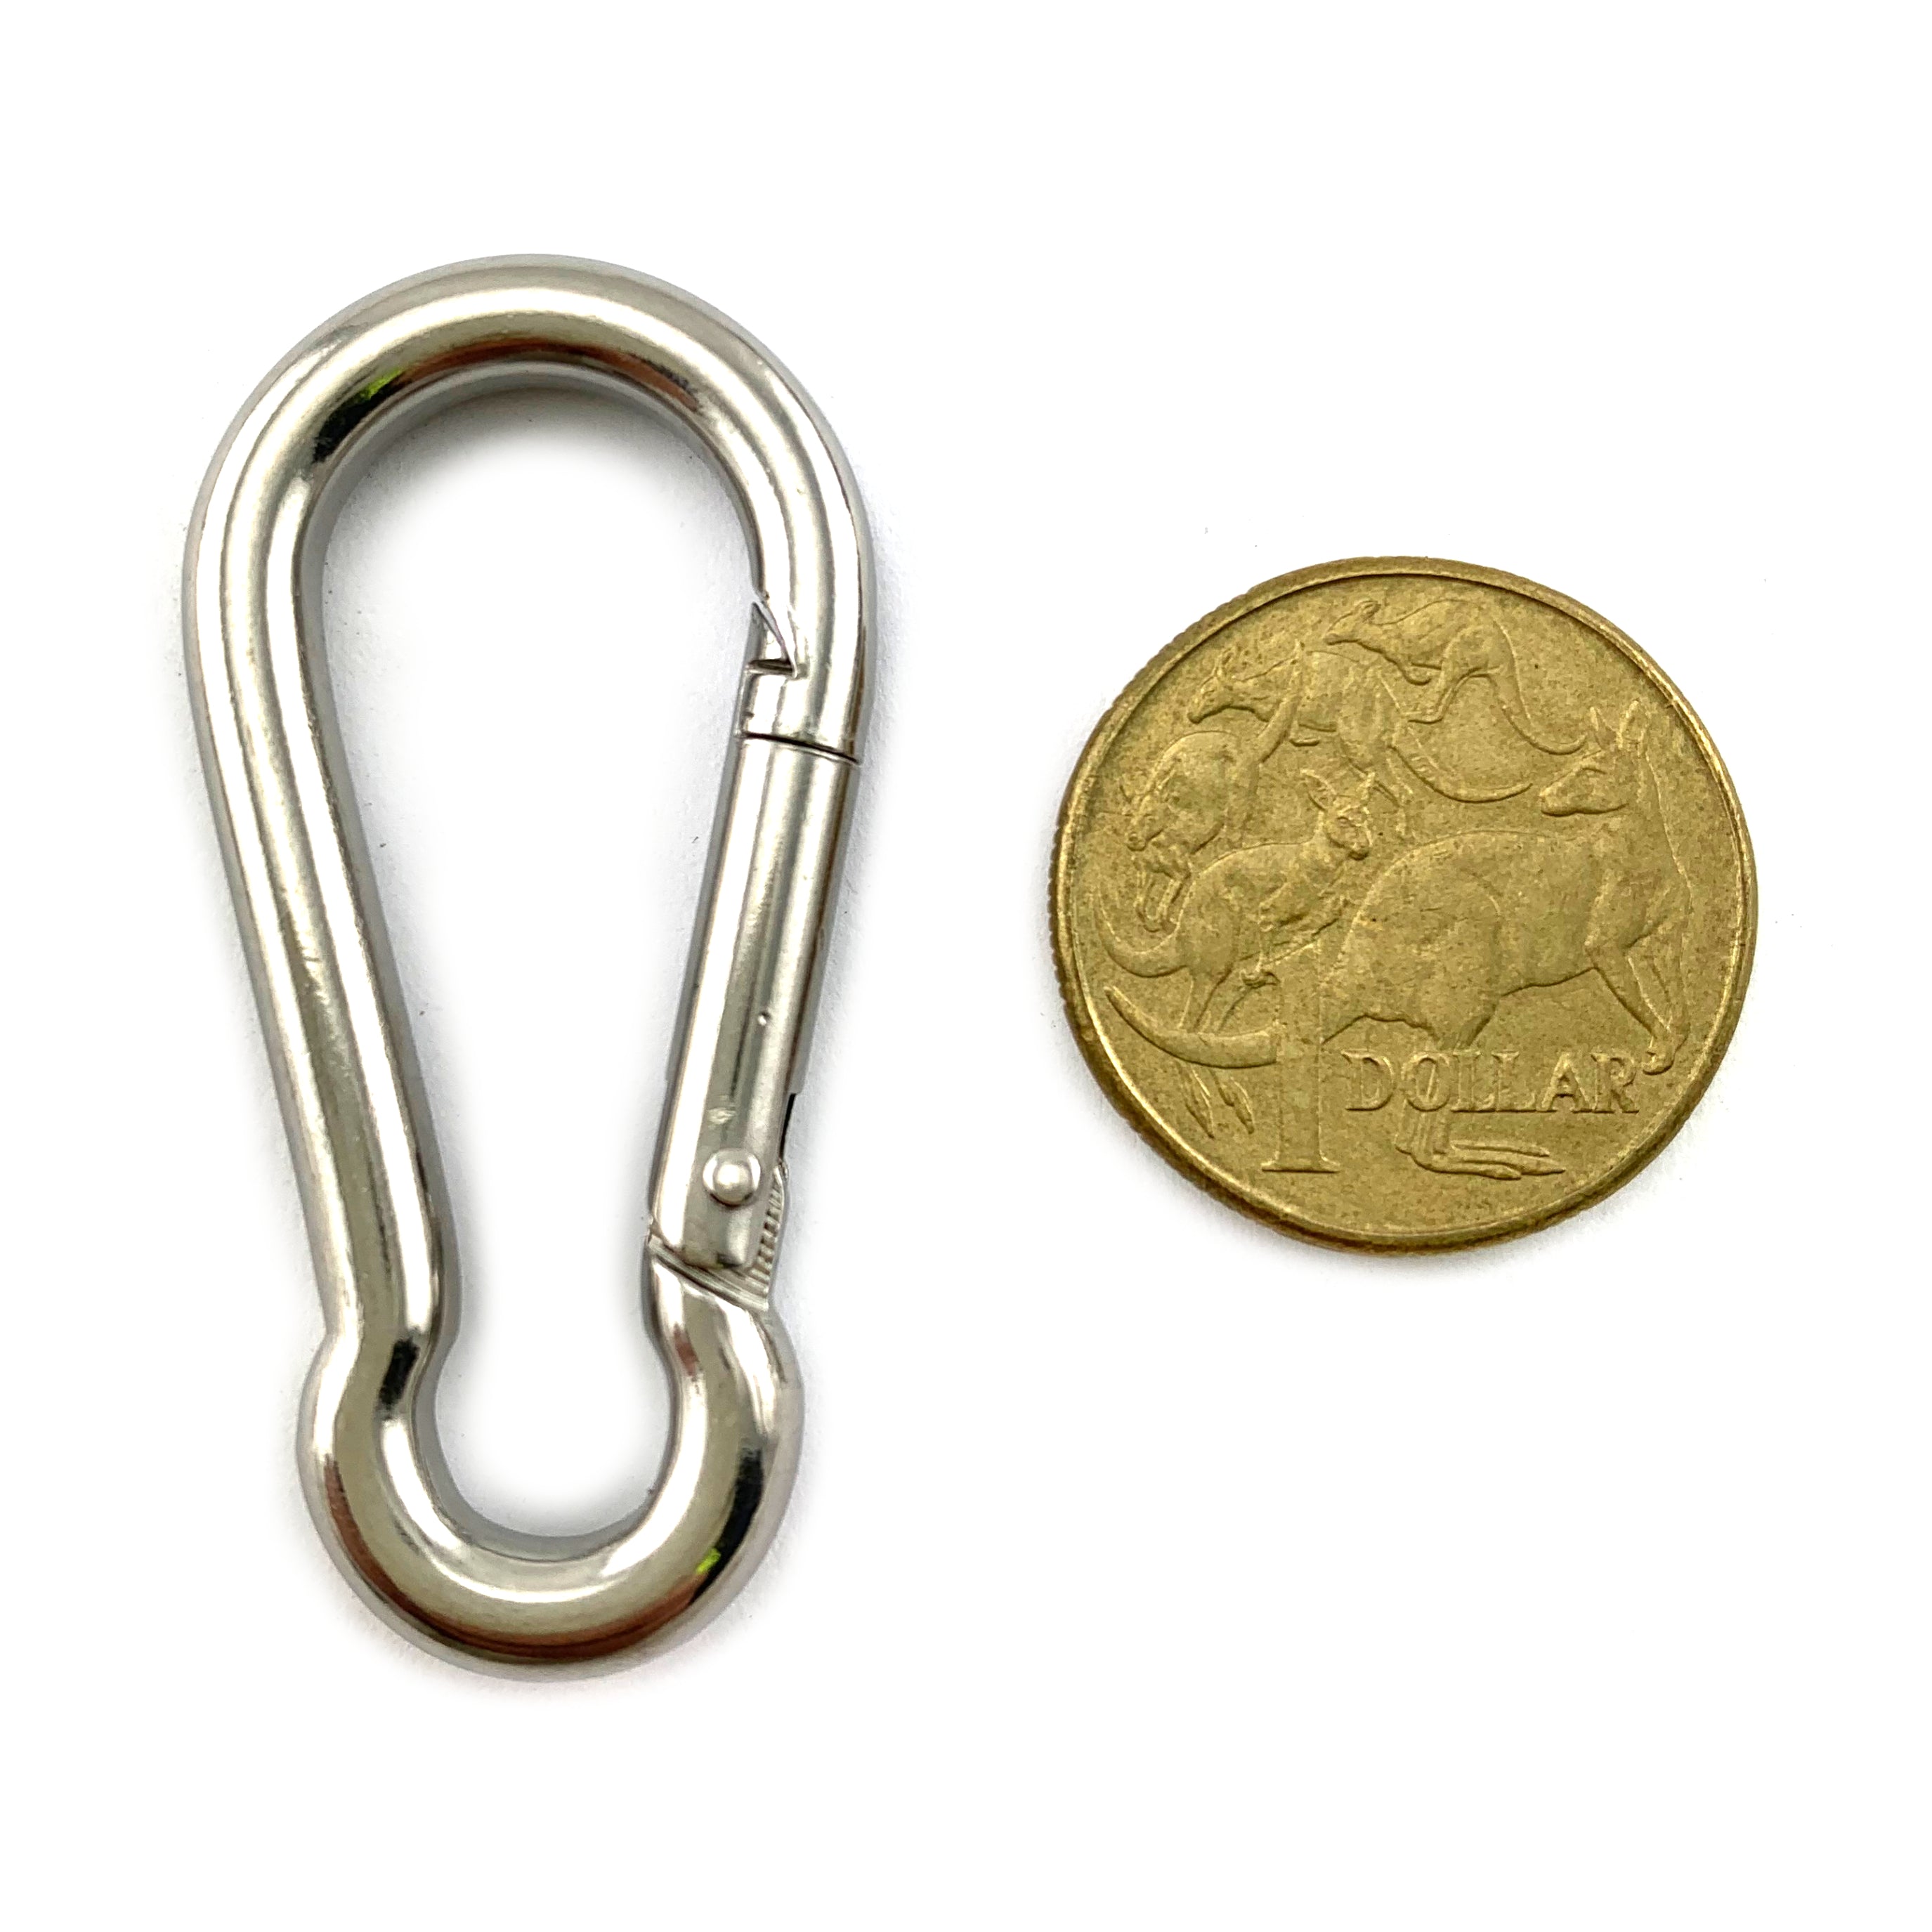 Snap hook in marine grade type 316 stainless steel, size 5mm.